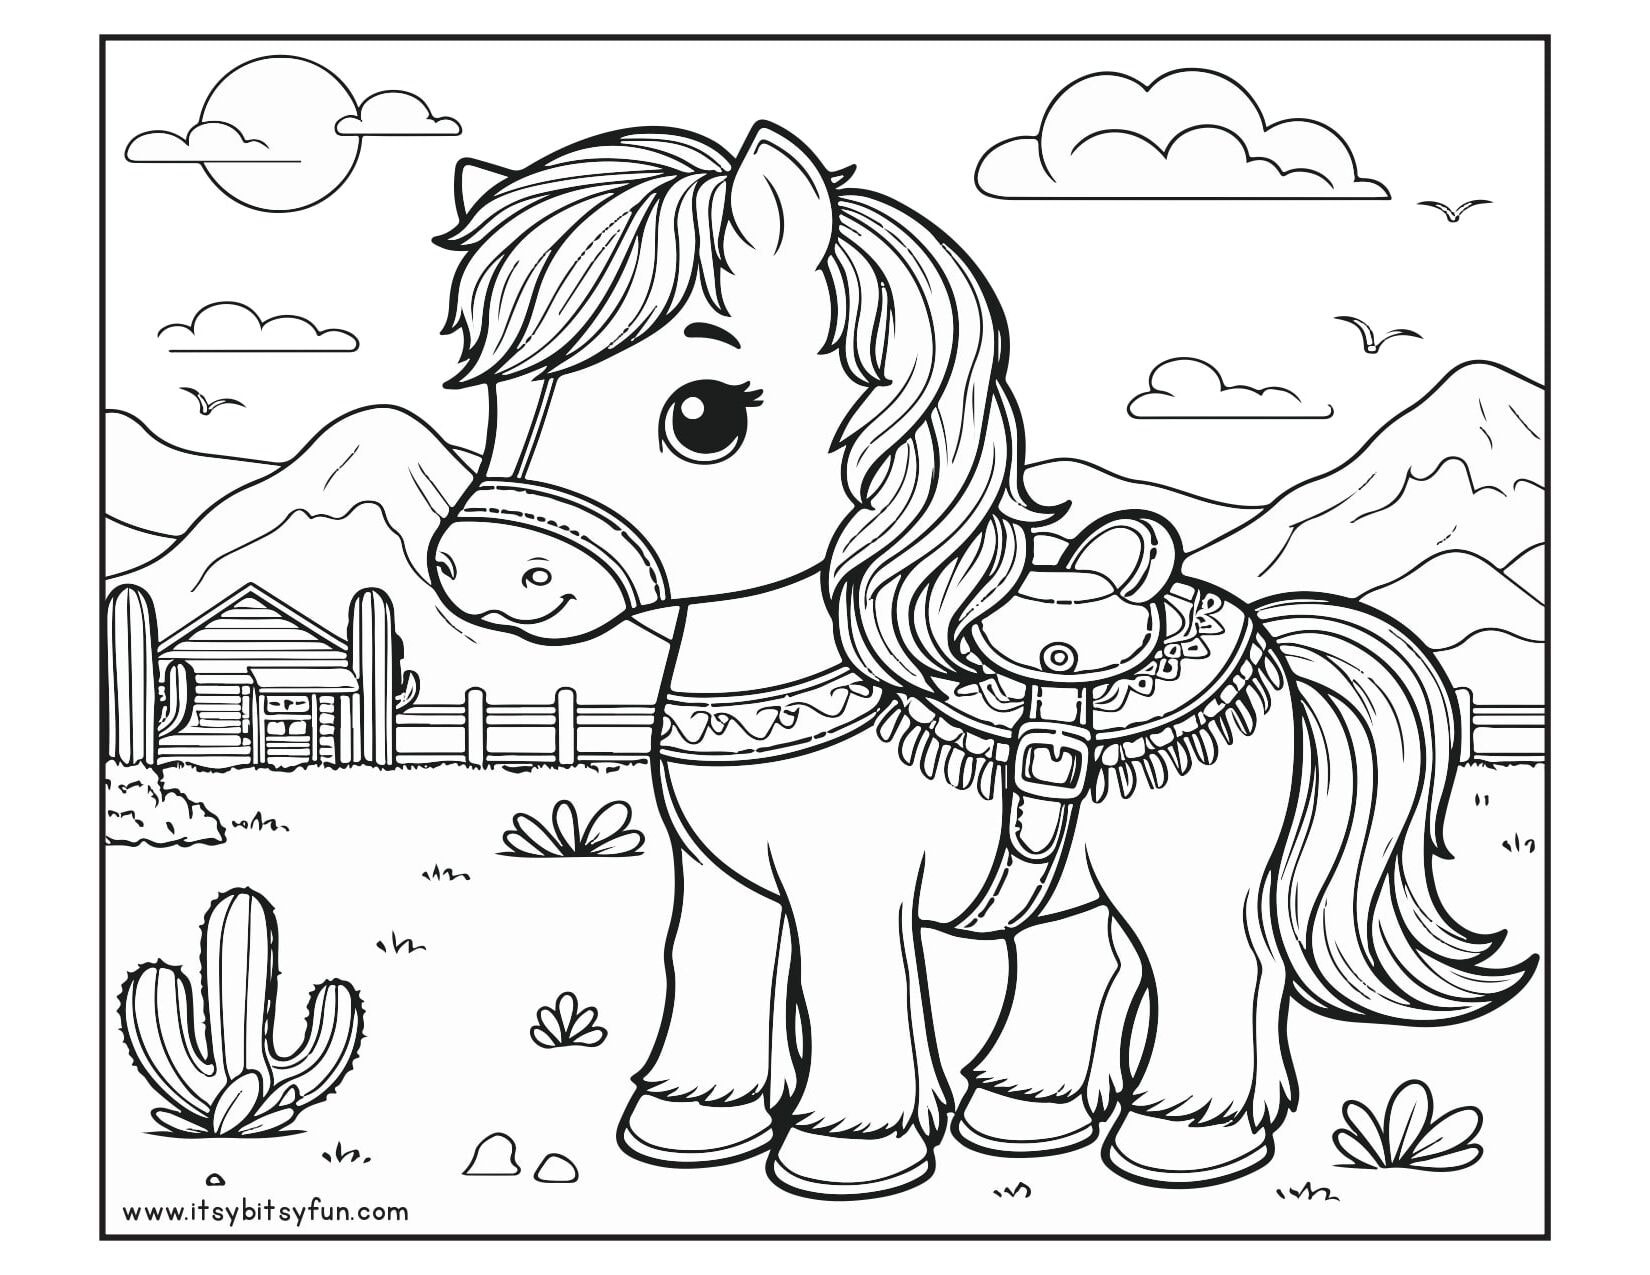 A saddled horse in the desert to color.